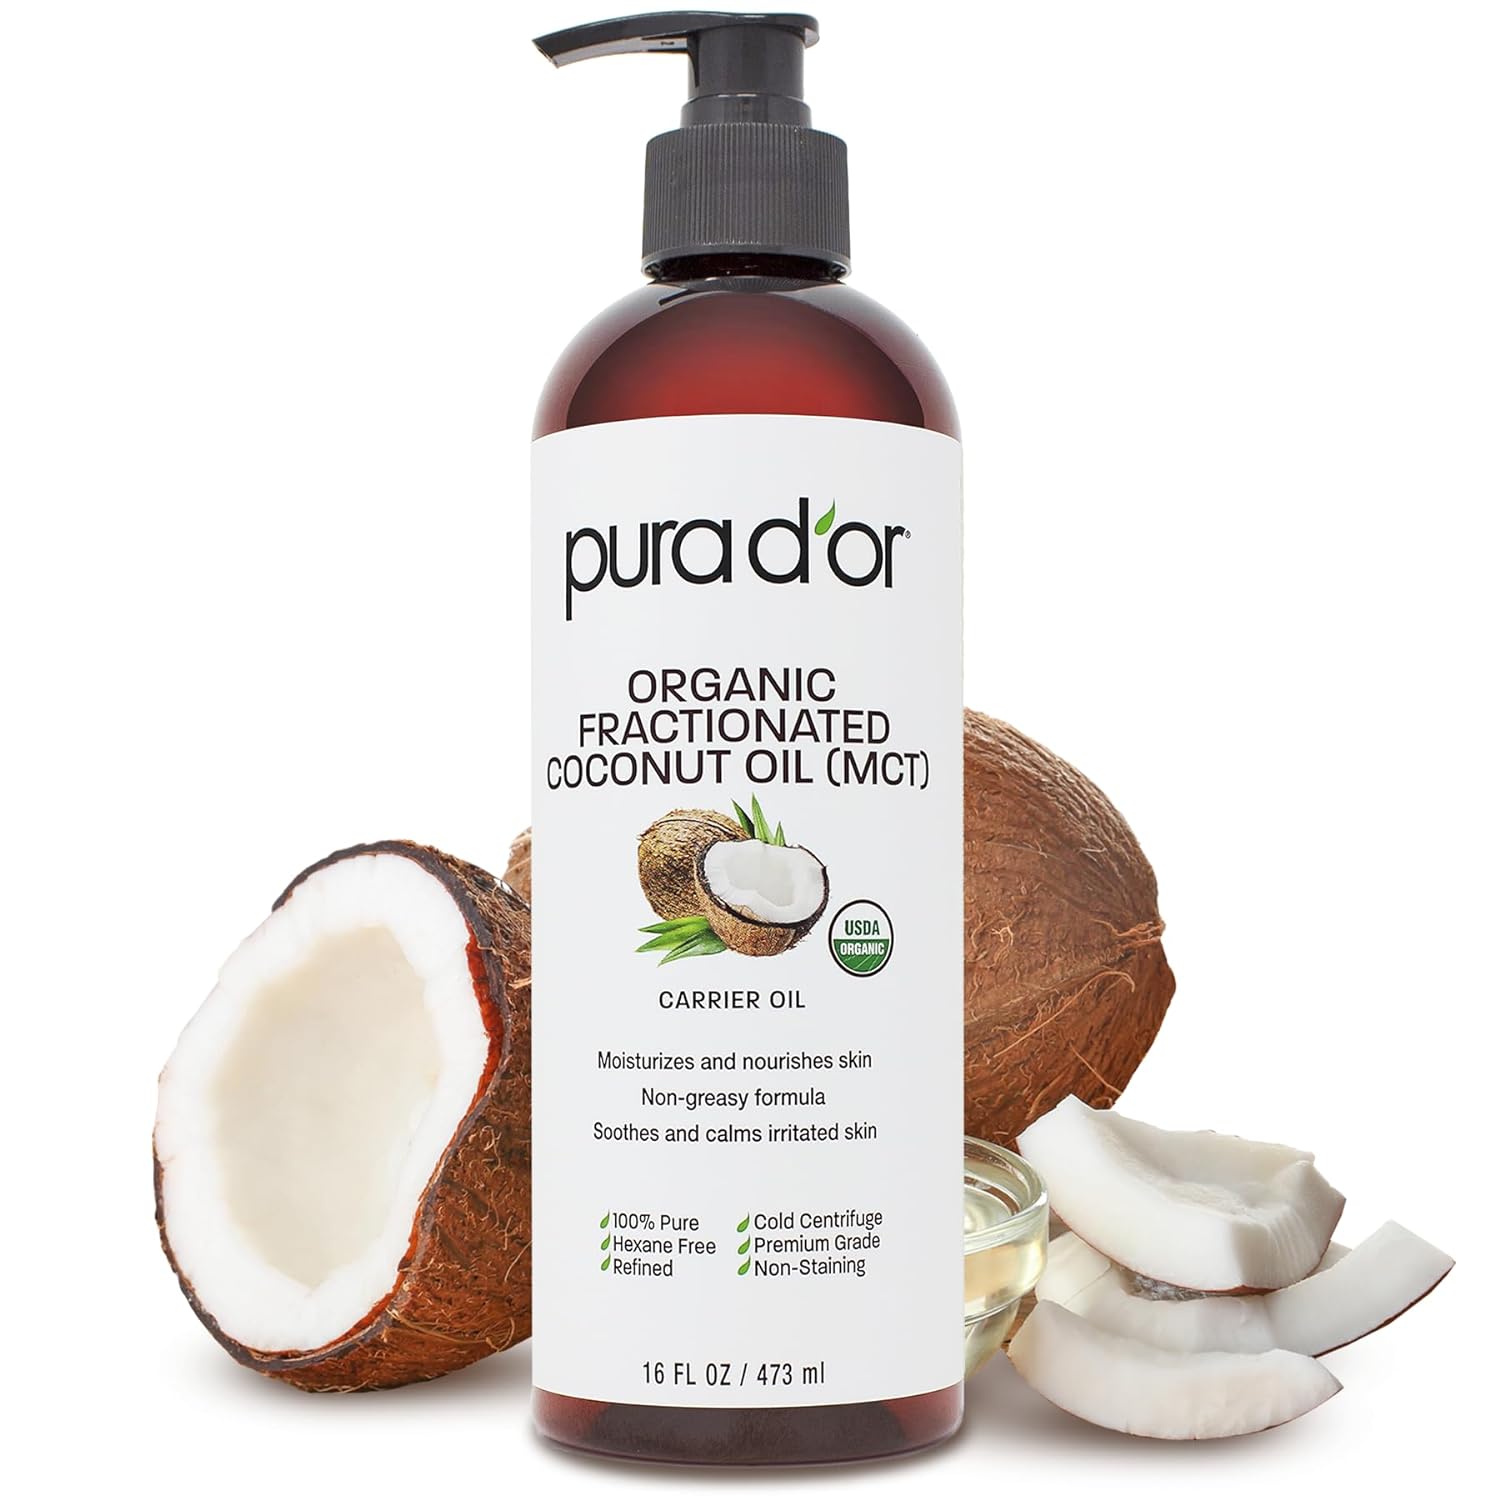 PURA DOR 16 Oz ORGANIC Fractionated Coconut Oil - 100% Pure  Natural USDA Certified Cold Pressed Carrier Oil - Non-Greasy, Unscented, Hexane Free Liquid Moisturizer - Face Skin  Hair - Men  Women